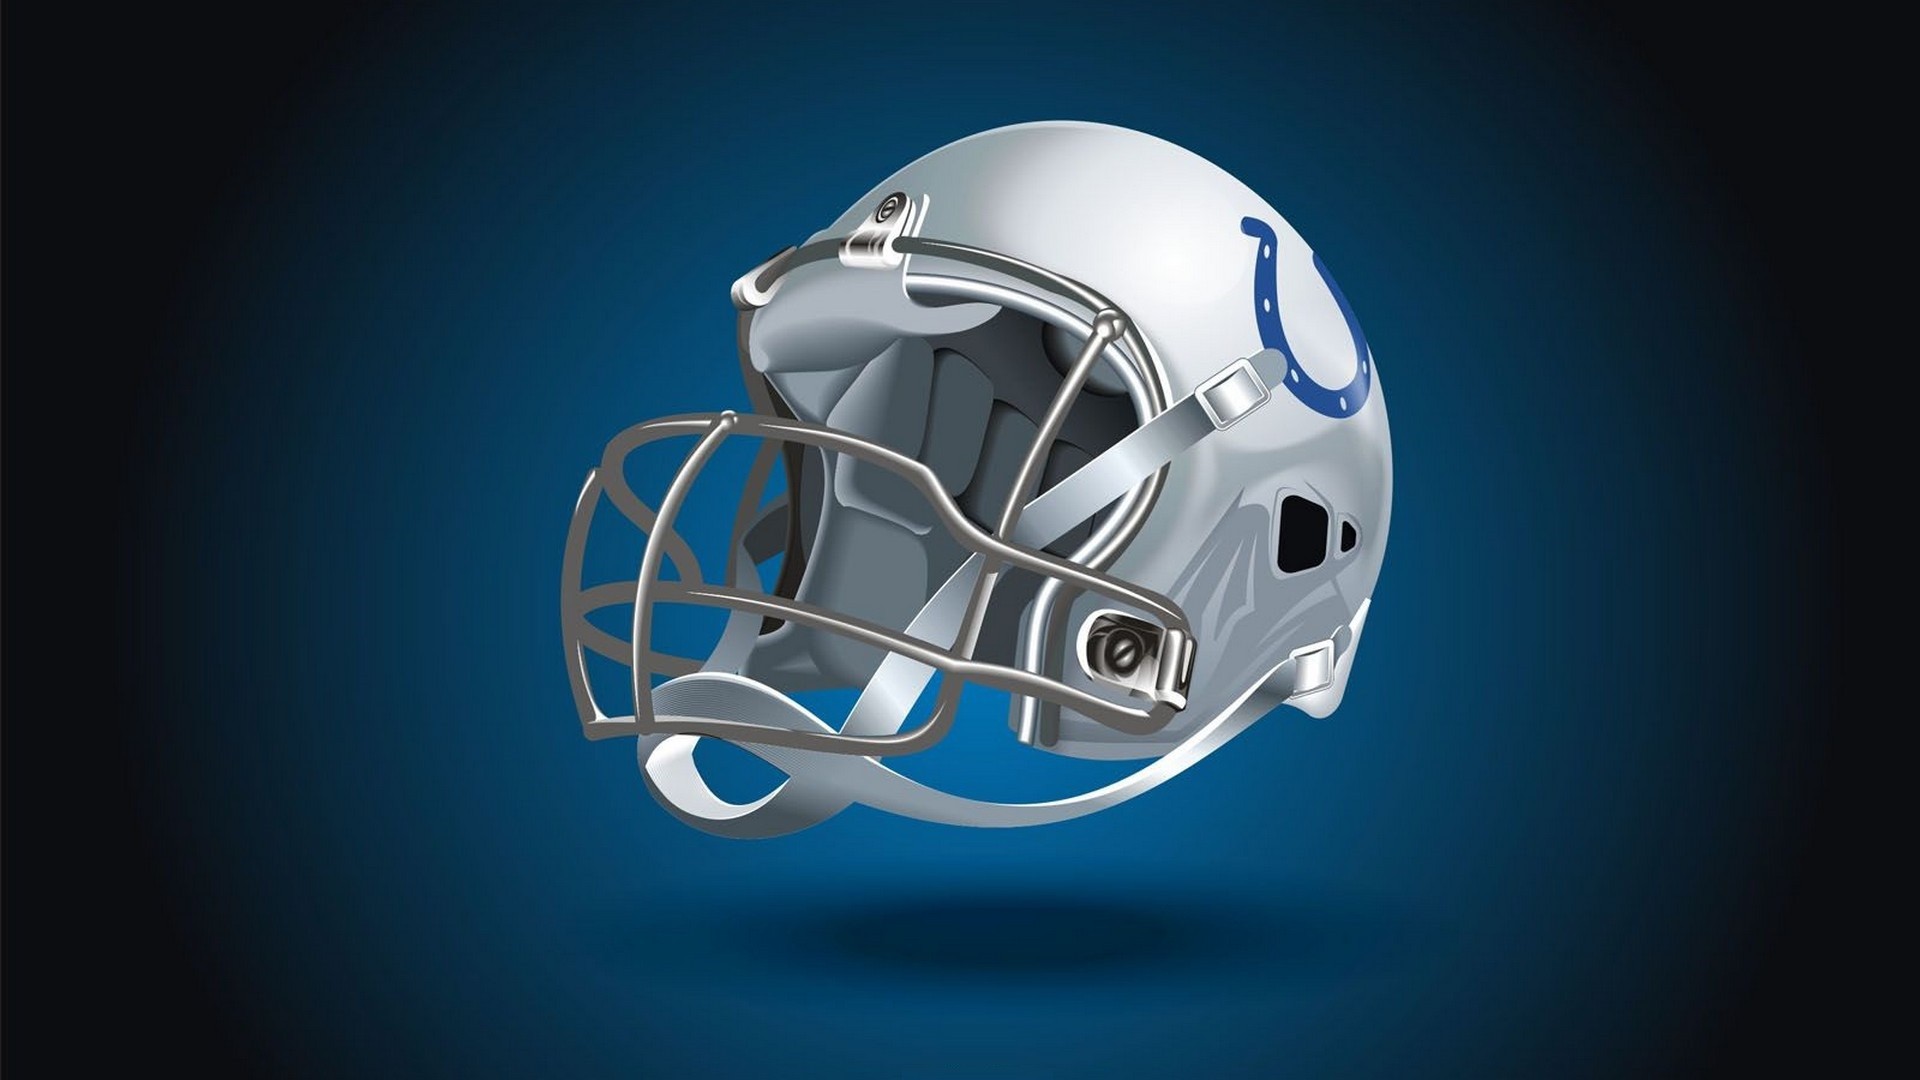 Indianapolis Colts Wallpaper For Mac OS with high-resolution 1920x1080 pixel. Download and set as wallpaper for Desktop Computer, Apple iPhone X, XS Max, XR, 8, 7, 6, SE, iPad, Android